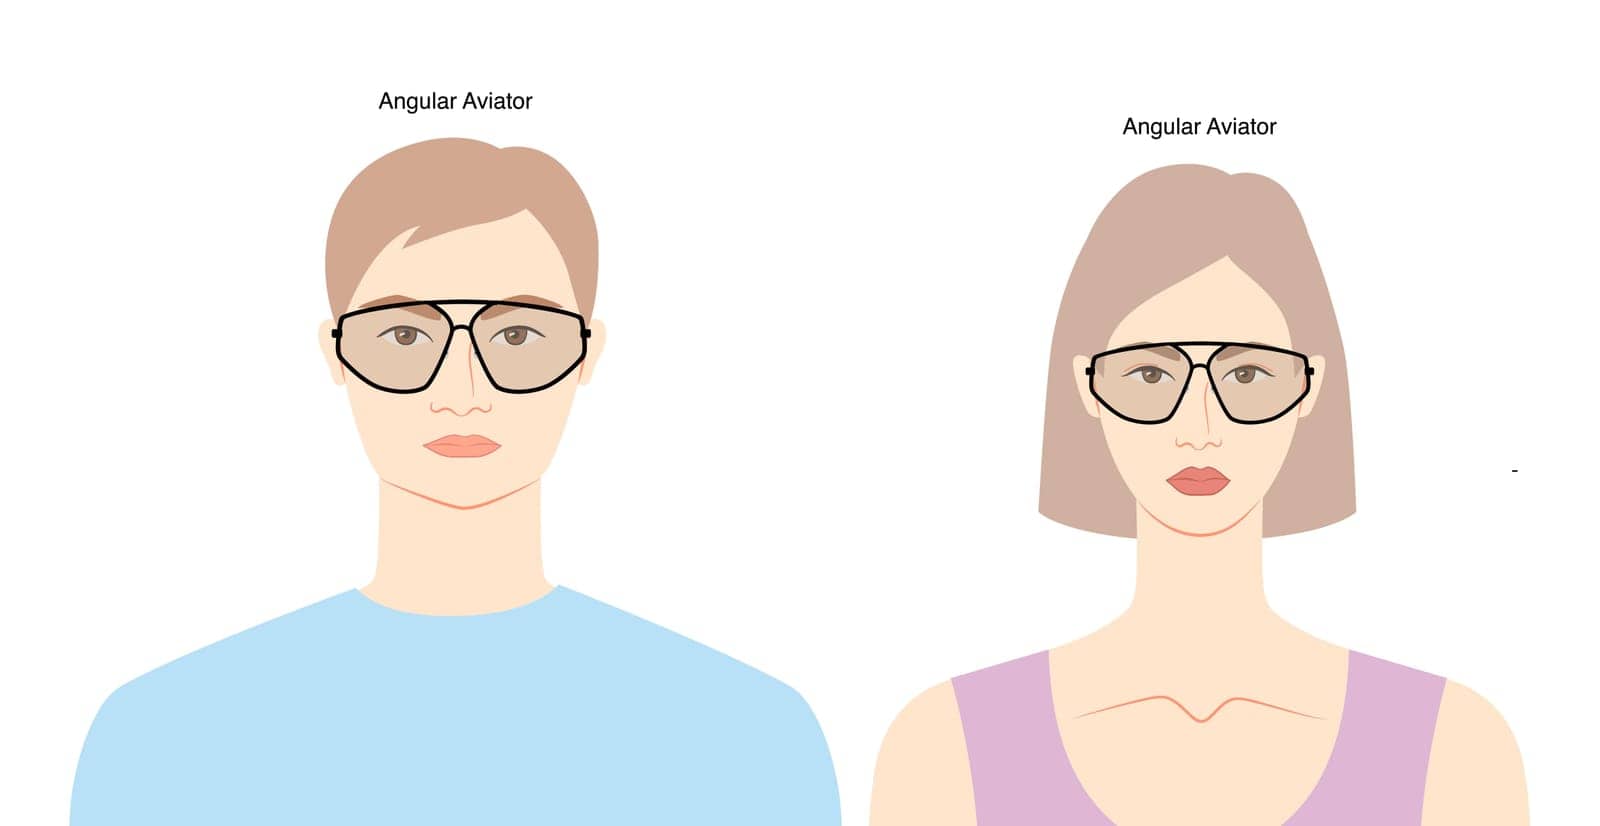 Angular Aviator frame glasses on women and men flat character fashion accessory illustration. Sunglass front view by Vectoressa